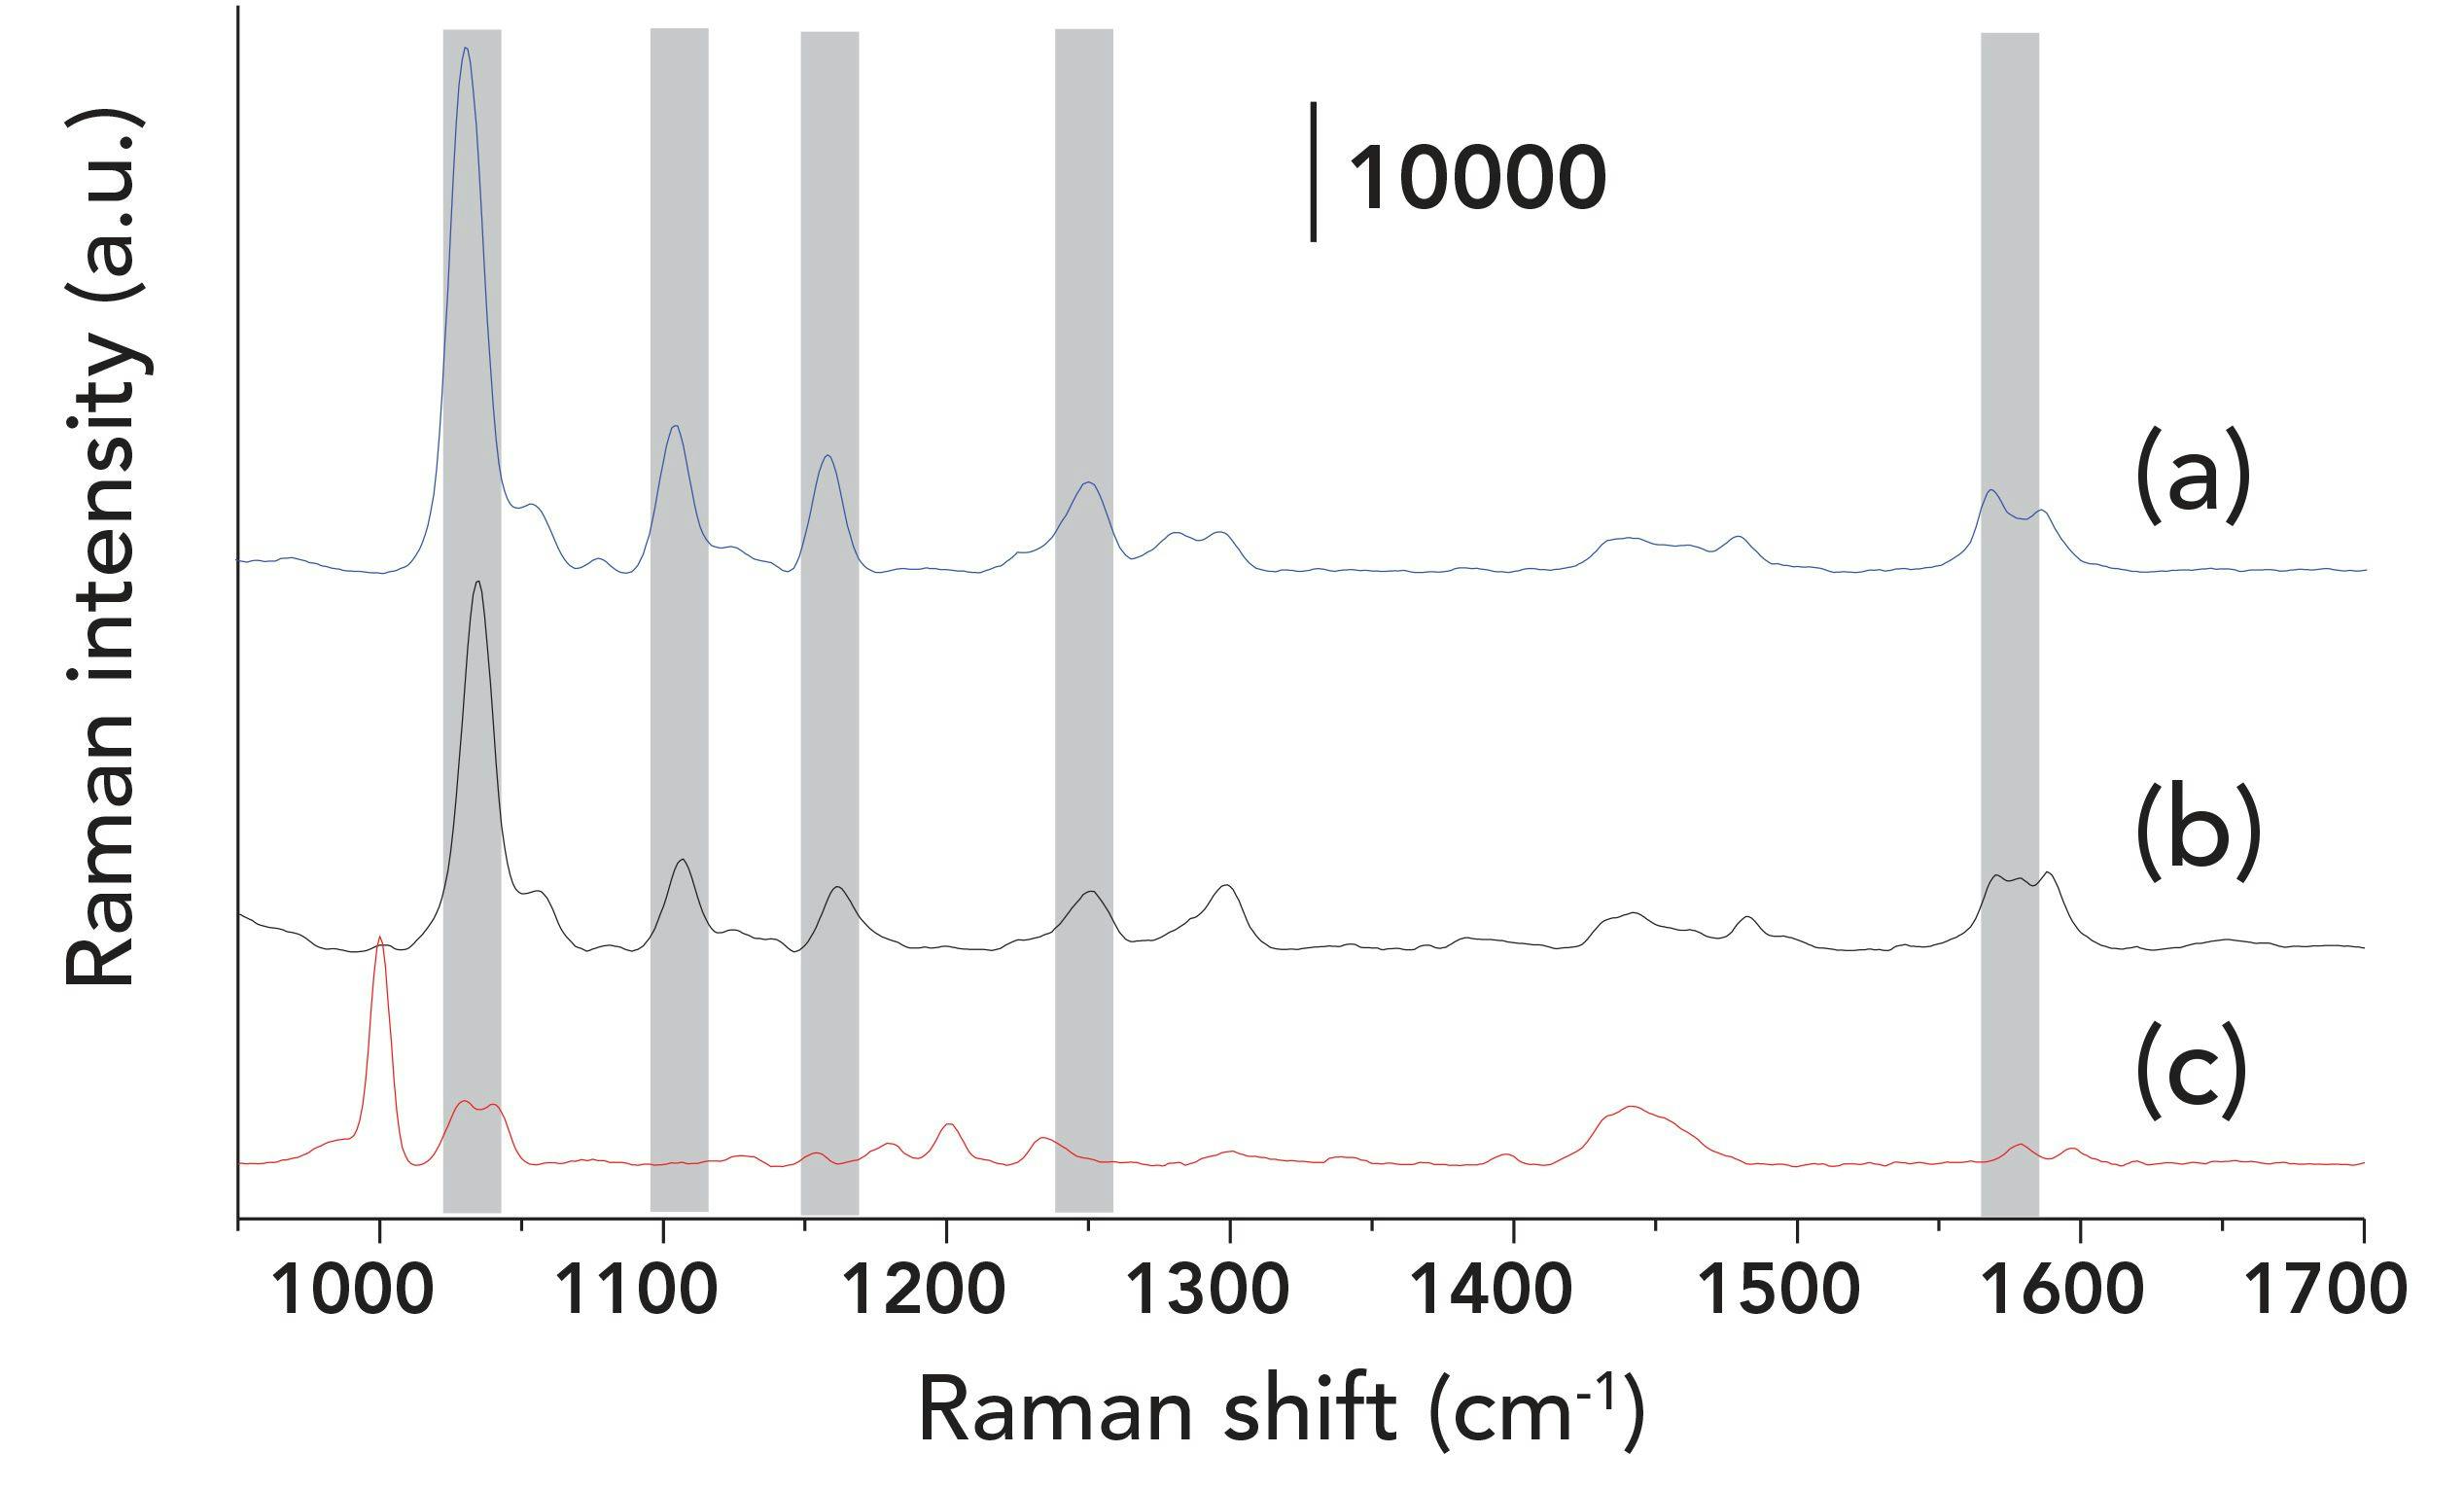 FIGURE 3: SERS spectra of (a) promethazine 10 ppm (3.5 x 10-5 M); (b) mixture at concentration ratio of 1:1 (1.5 x 10-5 M); (c) scopolamine 6 ppm (2 x 10-5 M).